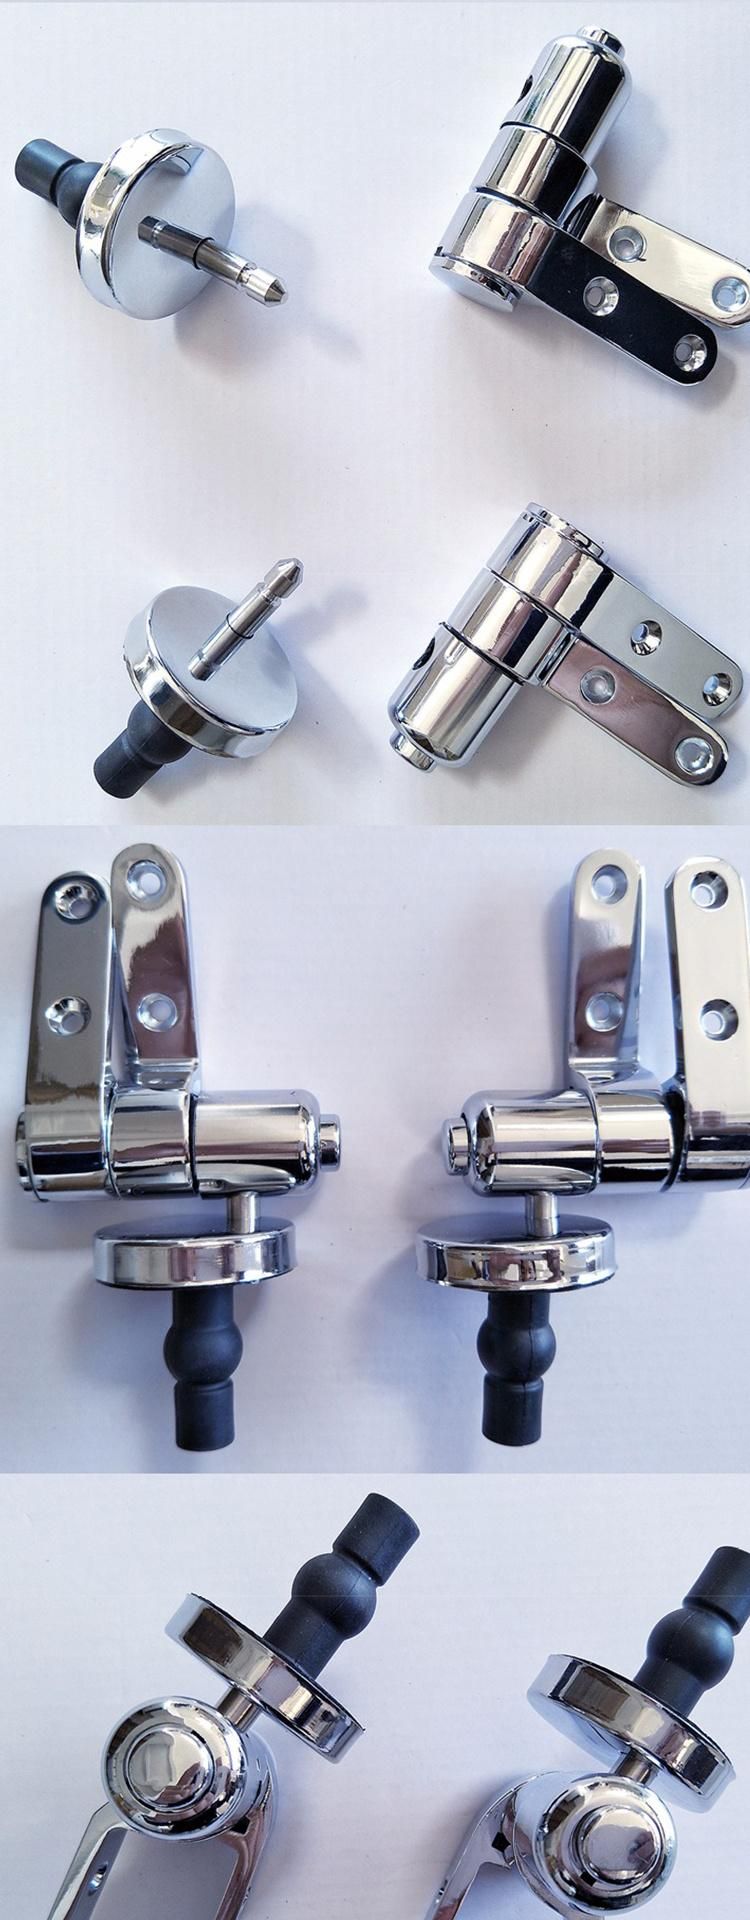 High Quality Stainless Steel Soft Close Hinges for Toilet Seat